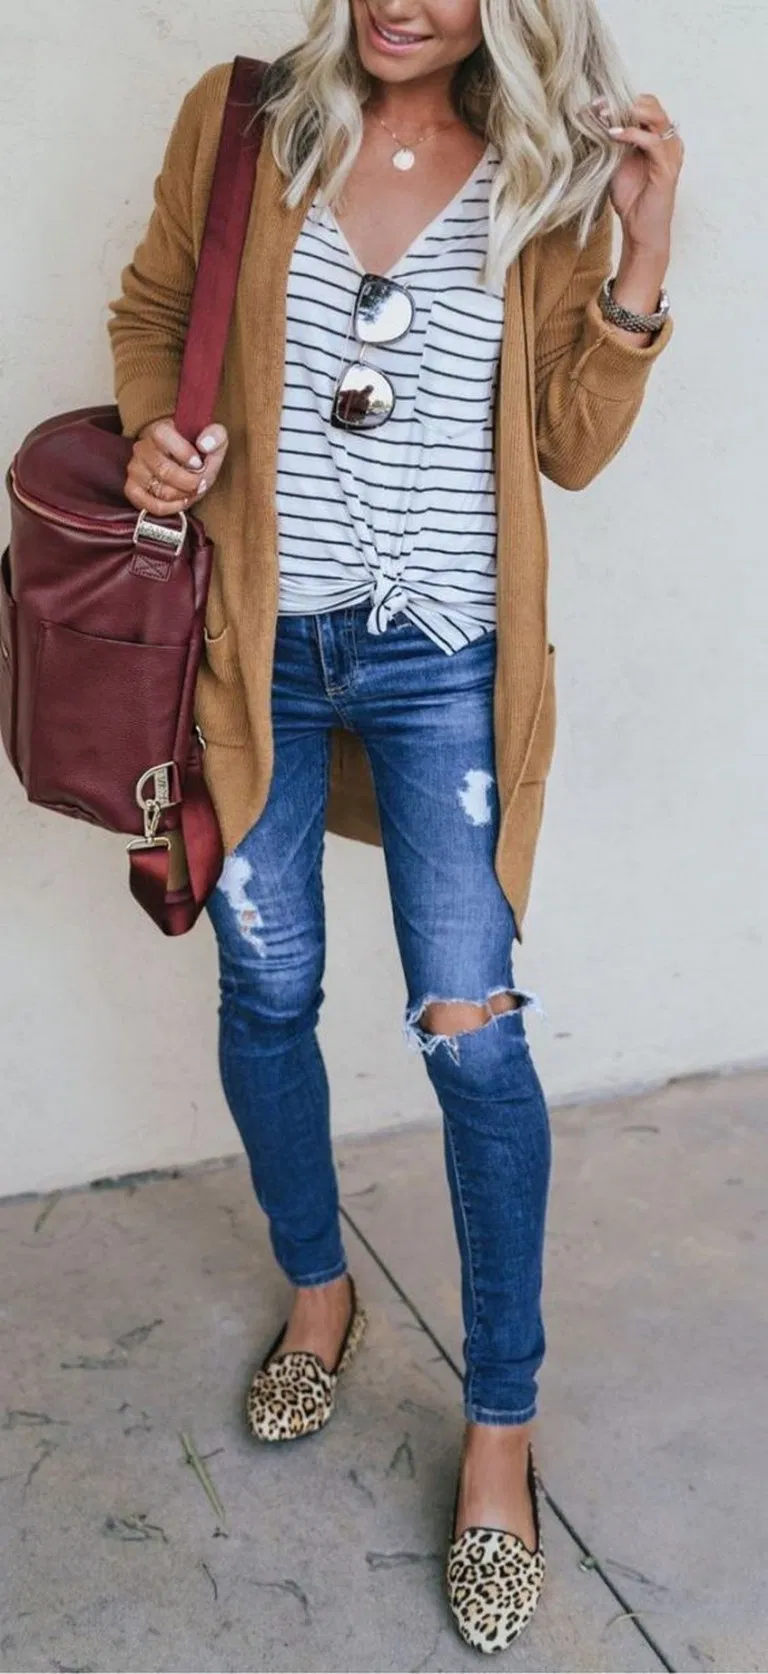 √45 Gorgeous Cardigan Outfit Ideas For Fall 2019 #cardigan #cardiganideas #fal…